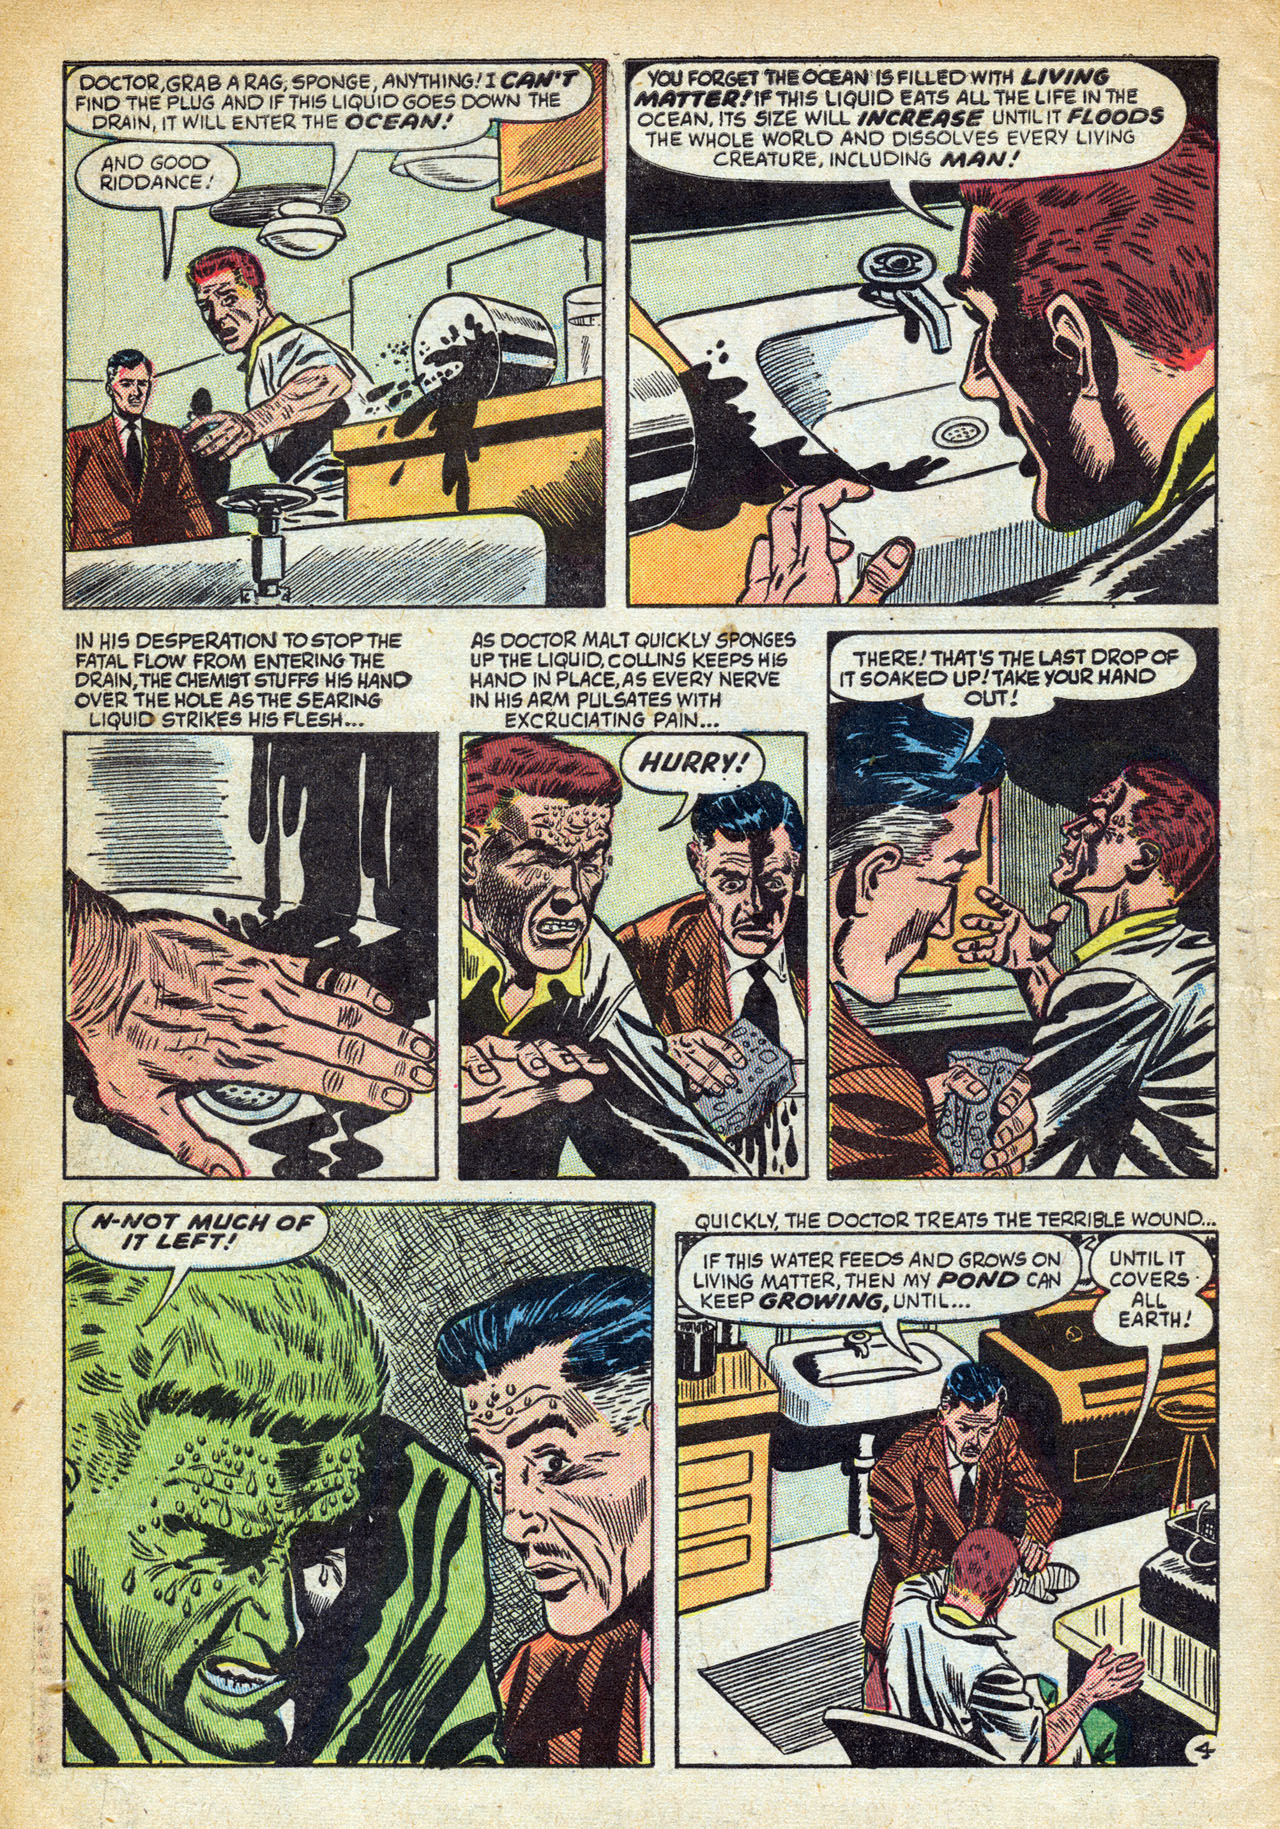 Marvel Tales (1949) 126 Page 5